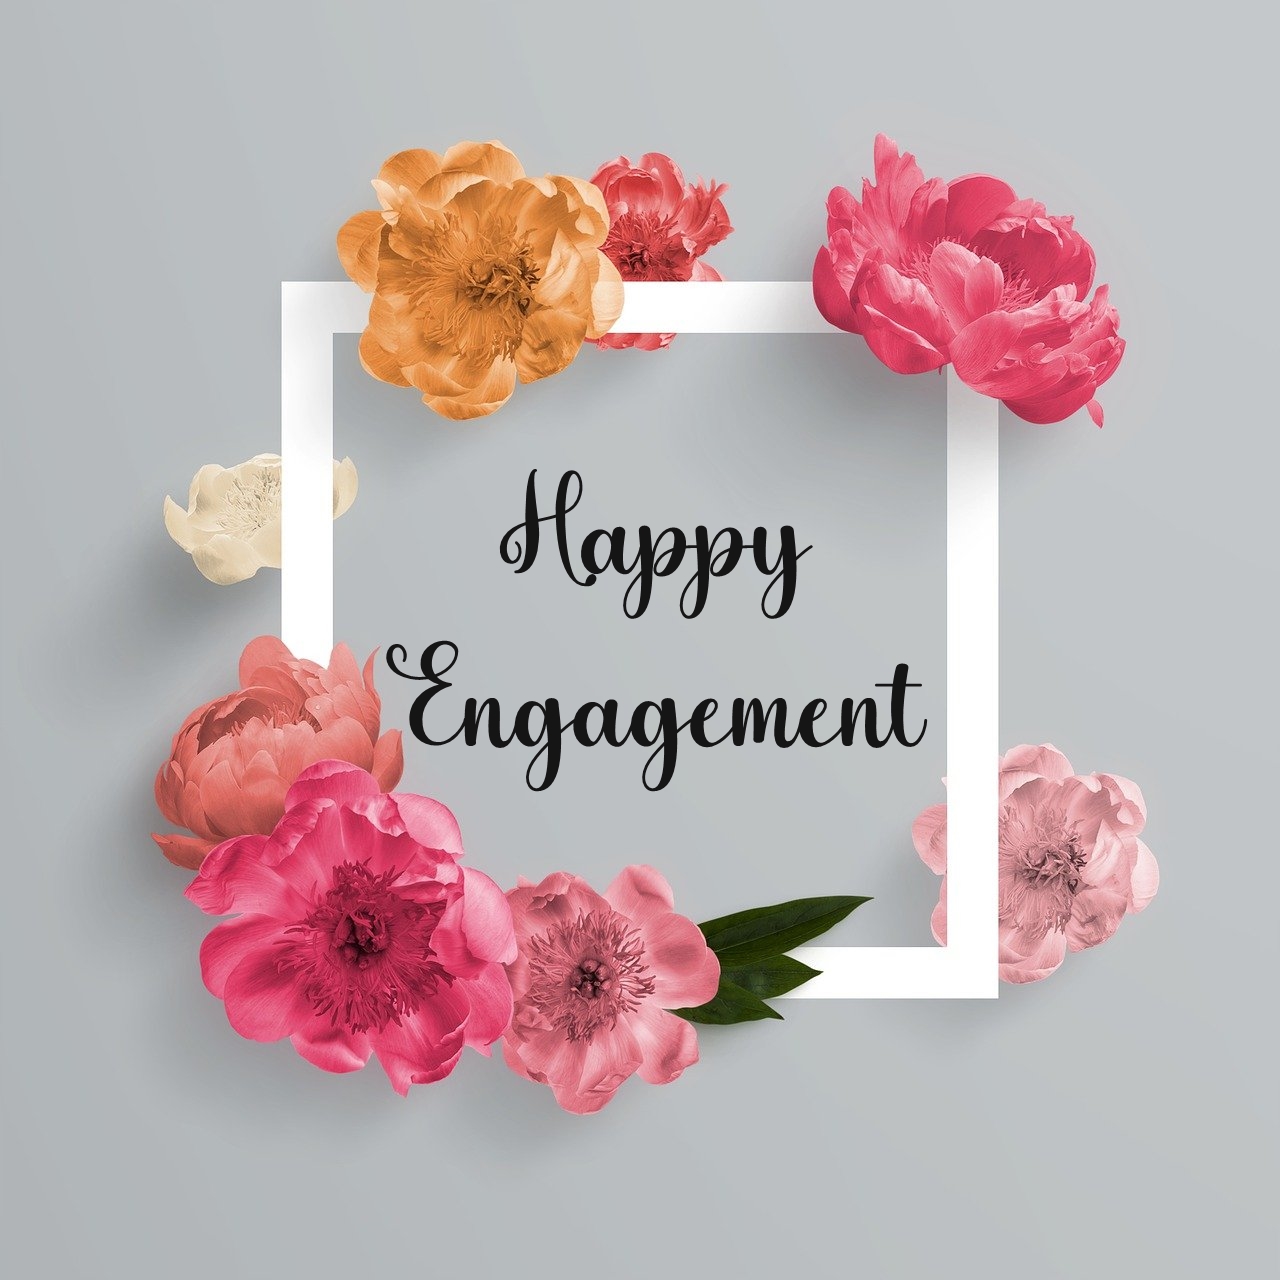 Engagement Wishes, Messages, Quotes, and Pictures - Webprecis